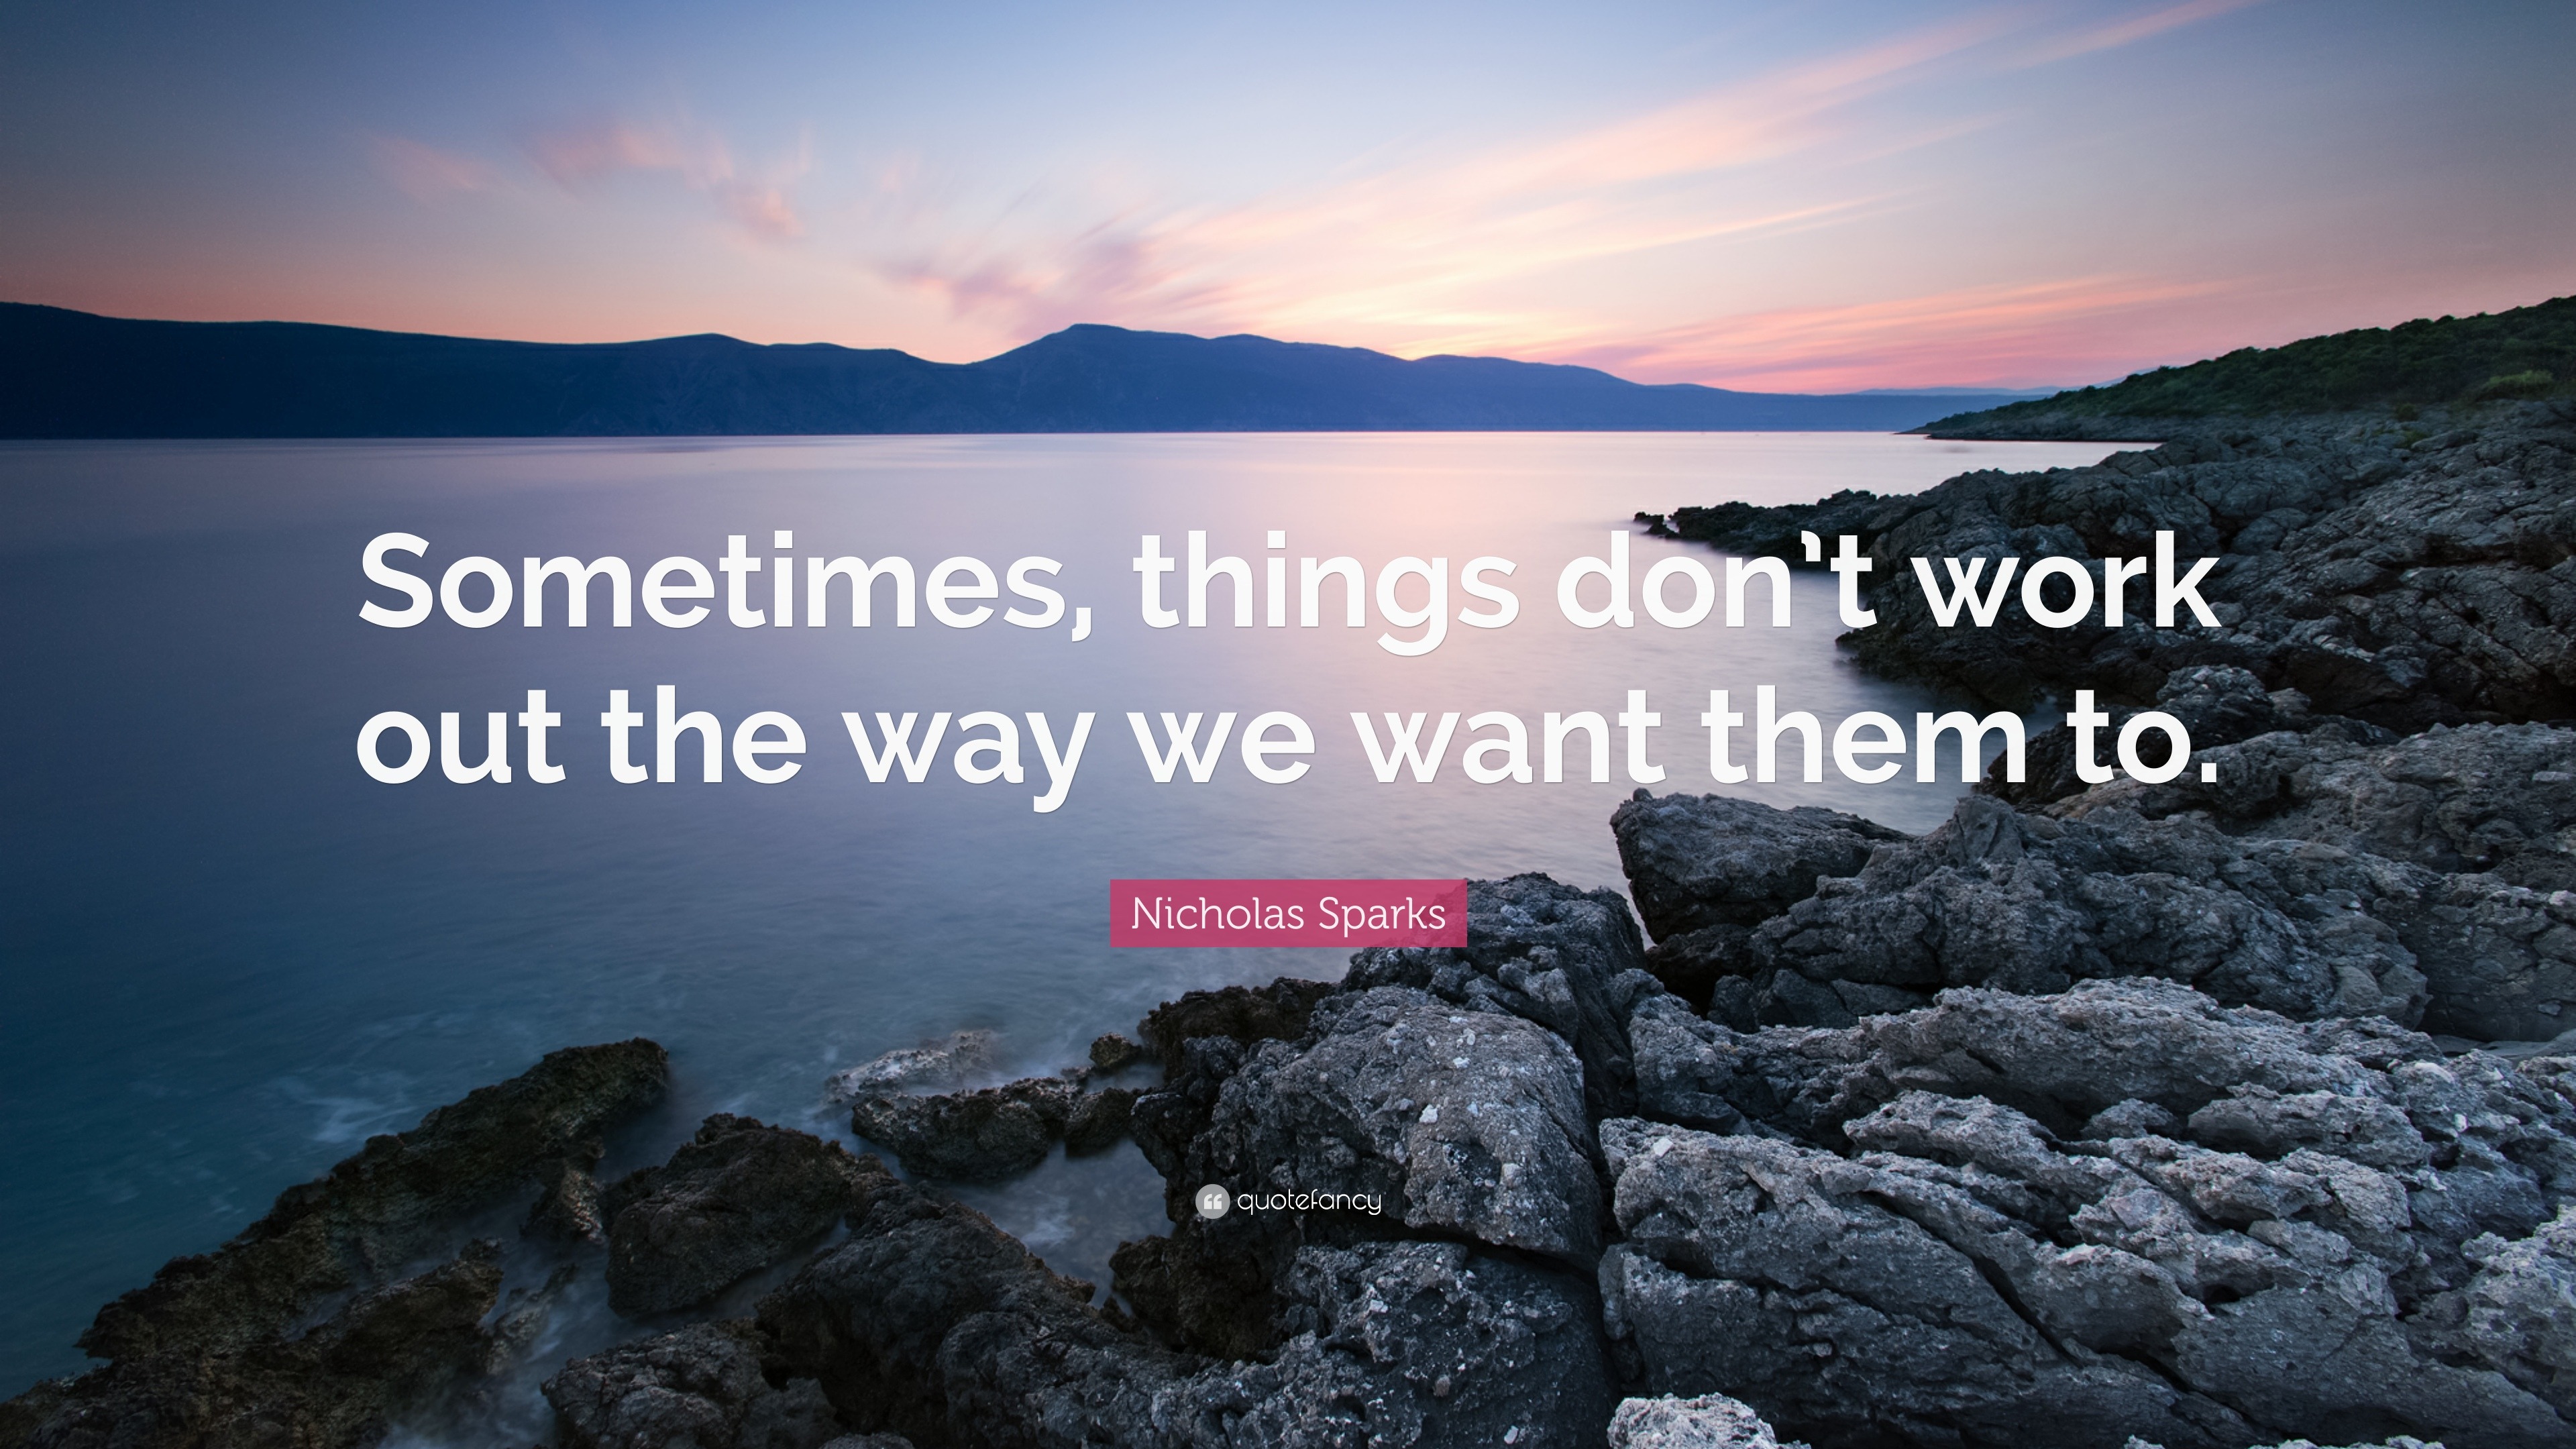 Nicholas Sparks Quote: “Sometimes, Things Don't Work Out The Way We Want Them To.”